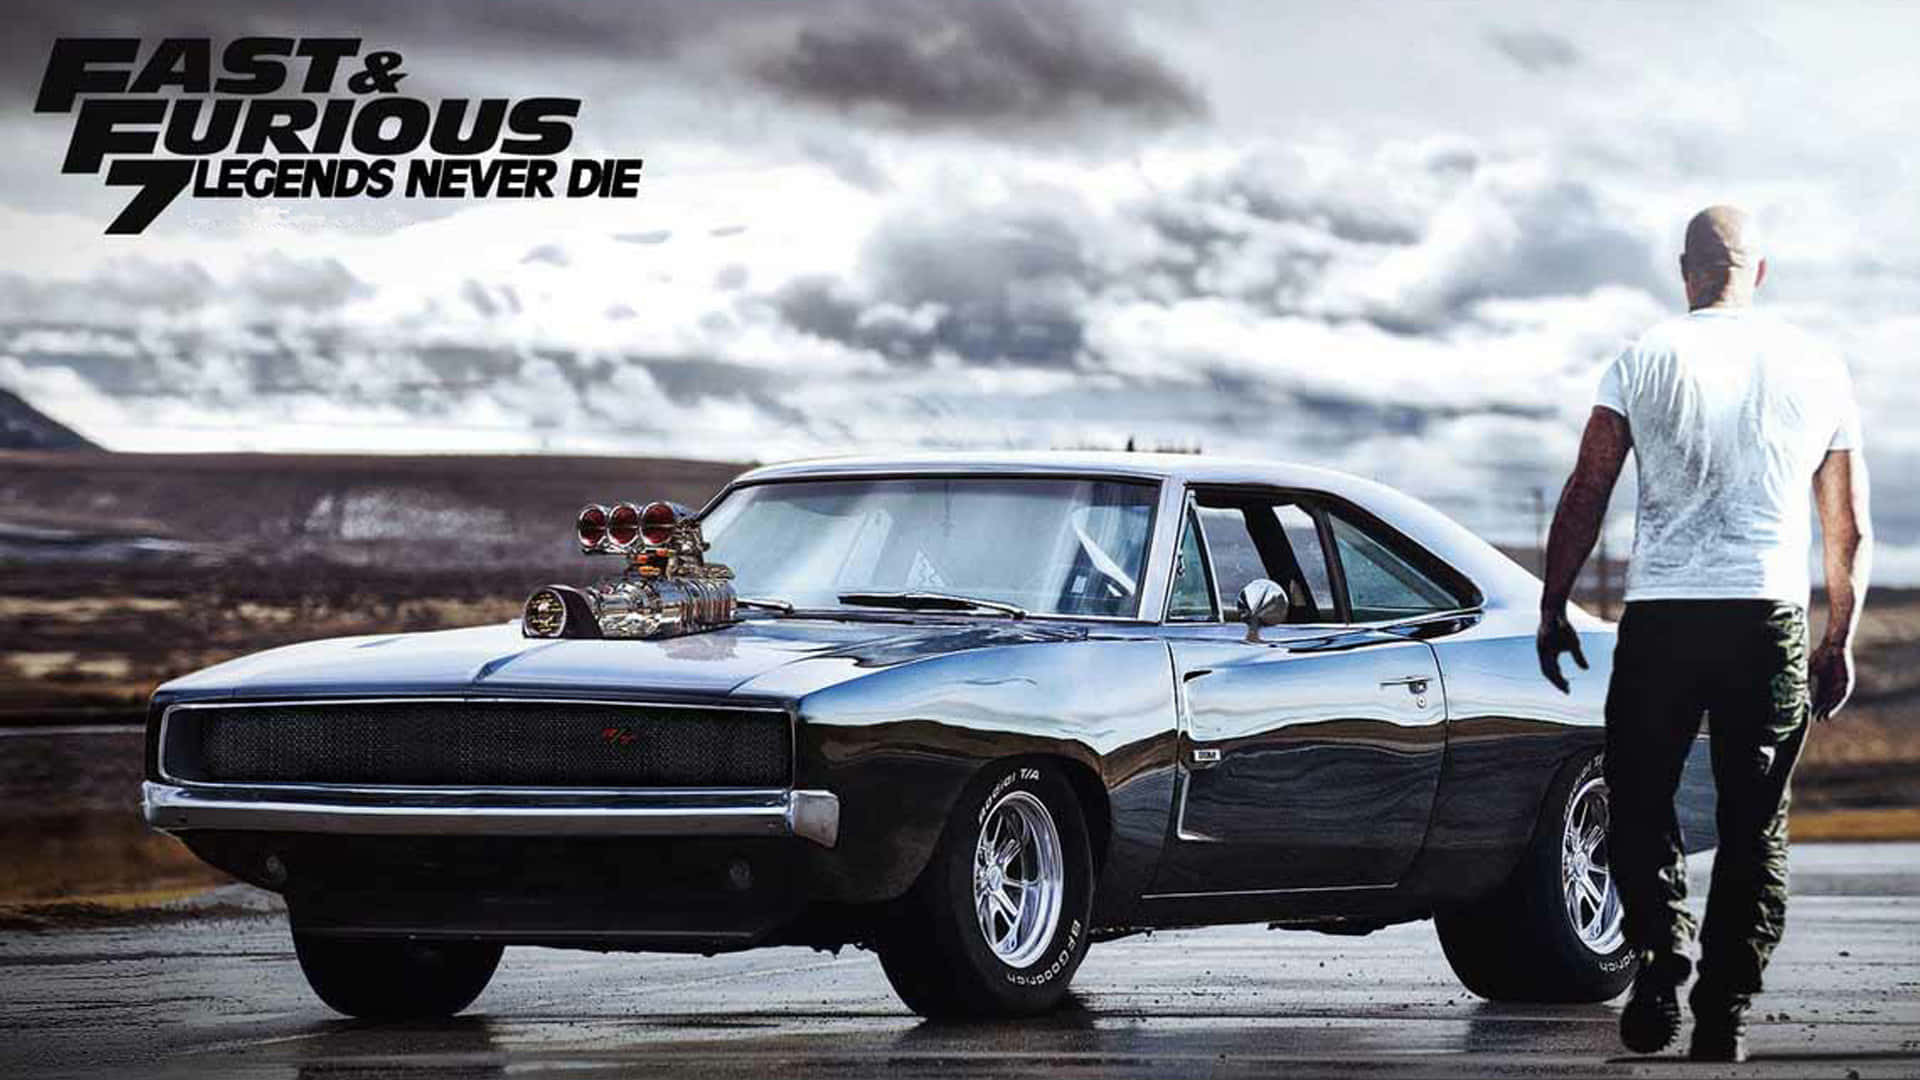 Fast and Furious: The Best Muscle Cars on AutoScout